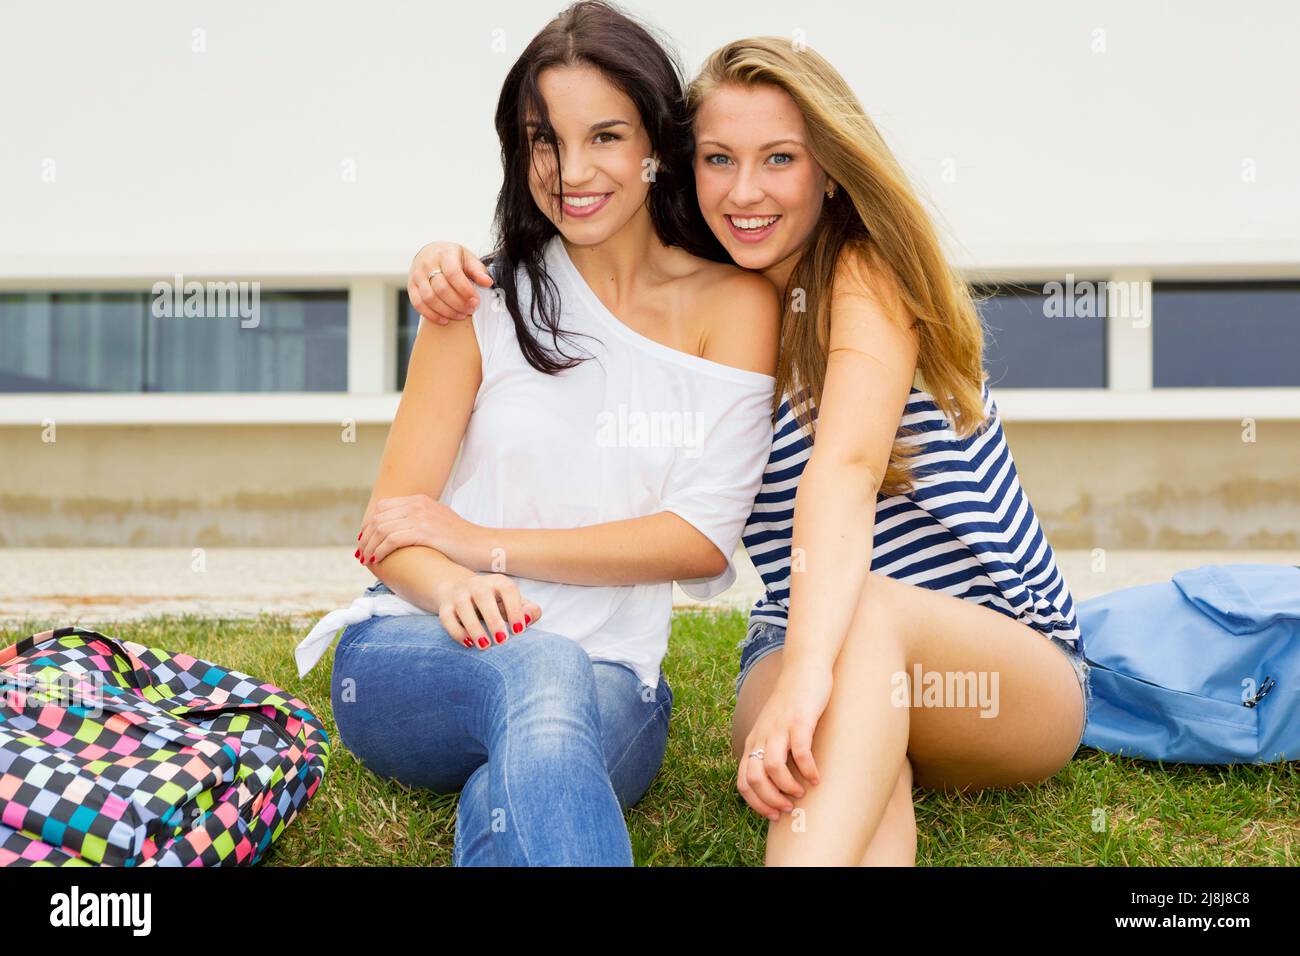 Beautiful and happy teenage students at the school Stock Photo